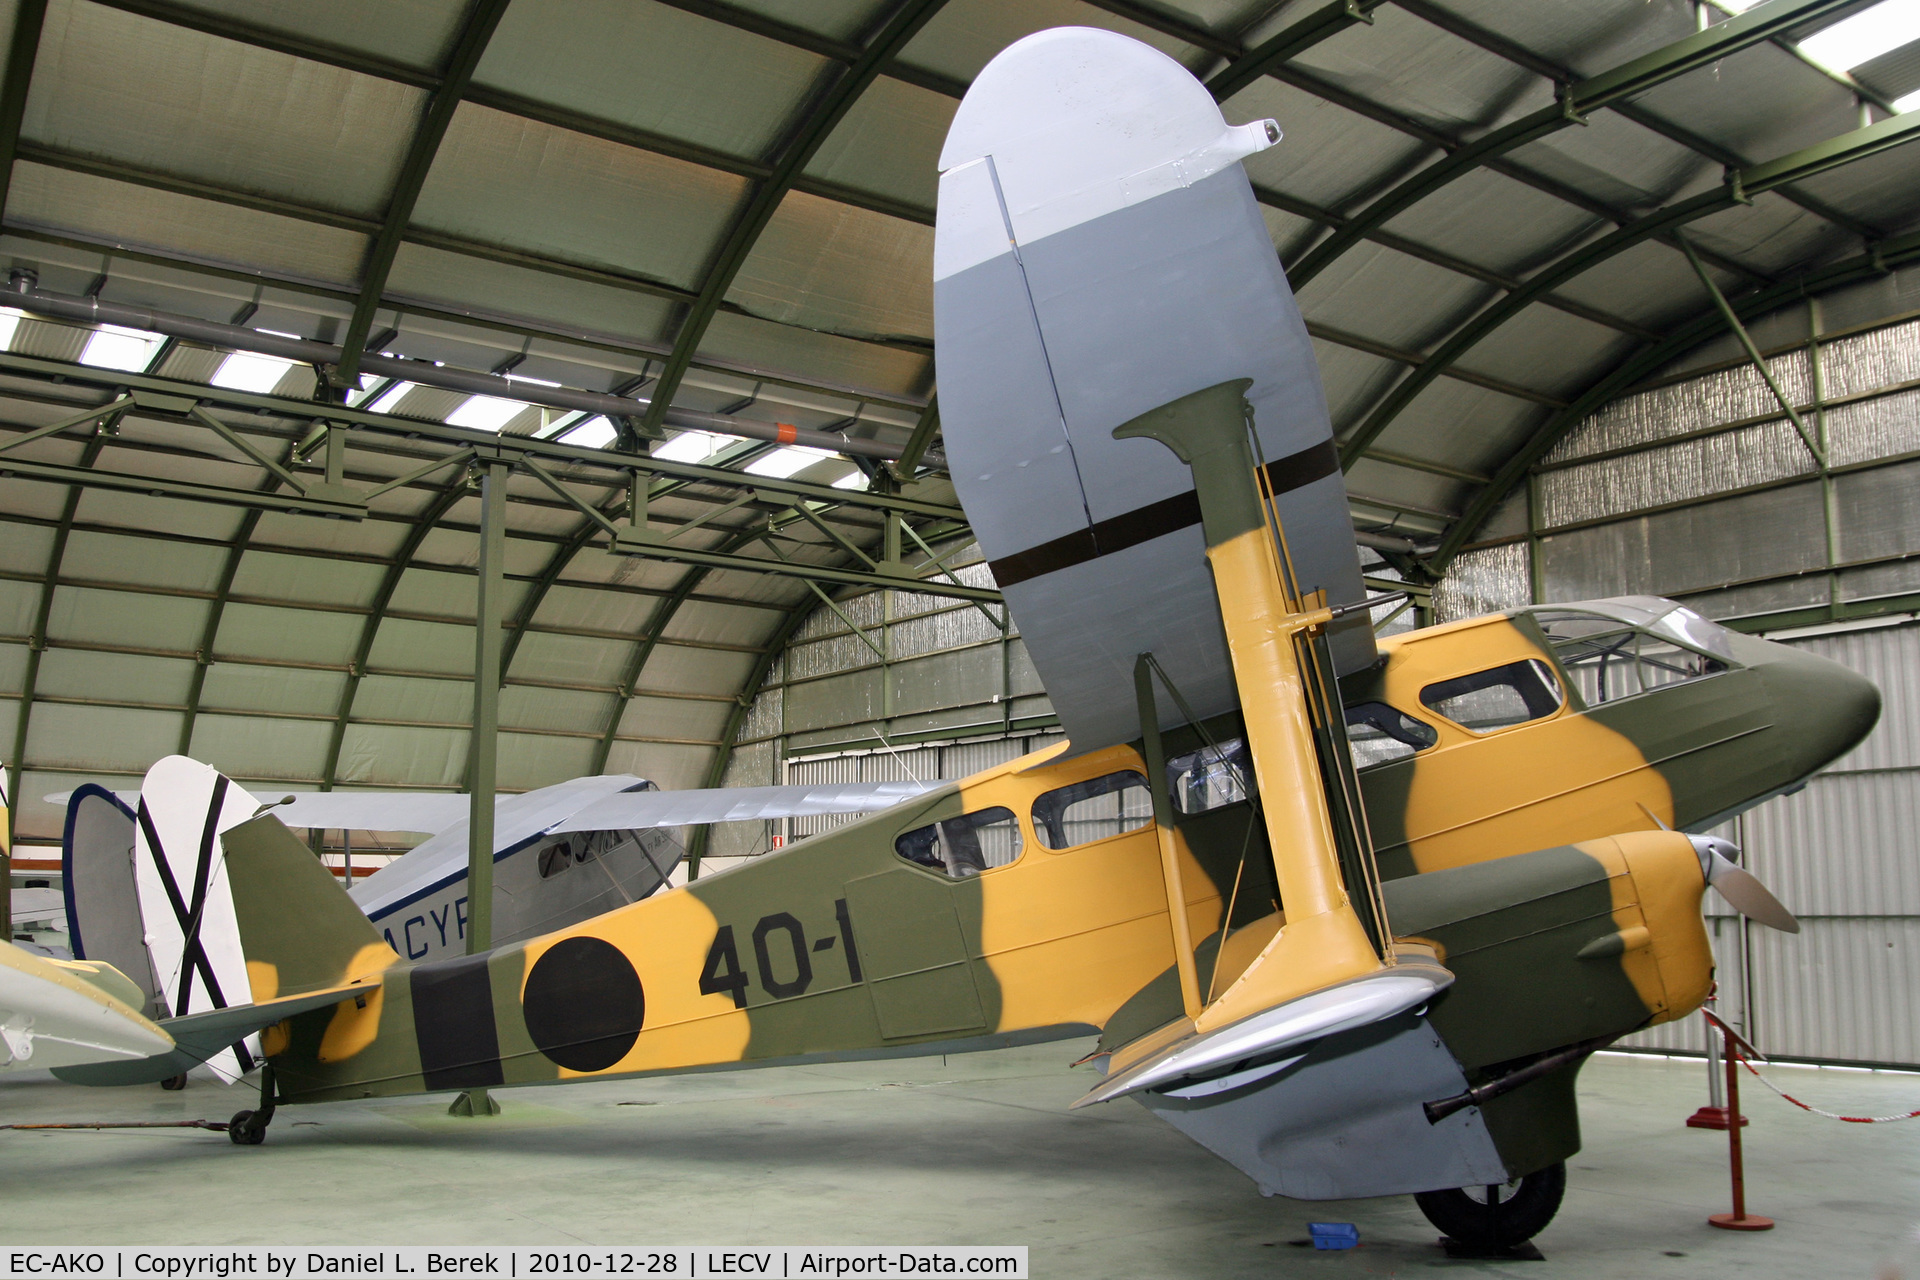 EC-AKO, 1937 De Havilland DH-89A Dragon Rapide C/N 6345, This beauty was restored in 2003 and is on display at the Museo del Aire, Cuatro Vientos, Madrid, Spain